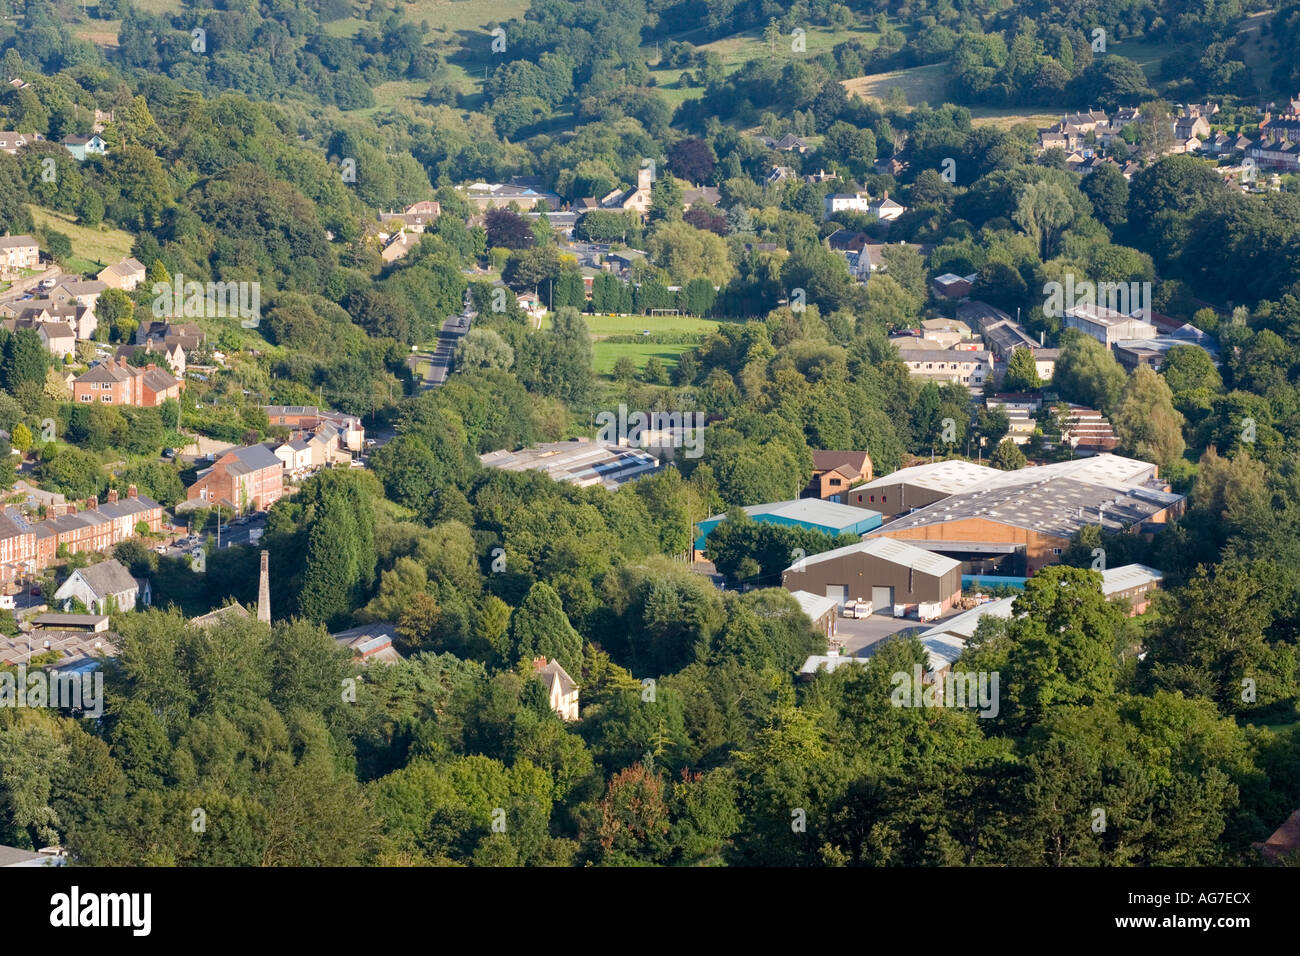 Brimscombe in the Stroud Valleys, Gloucestershire viewed from Rodborough Common Stock Photo